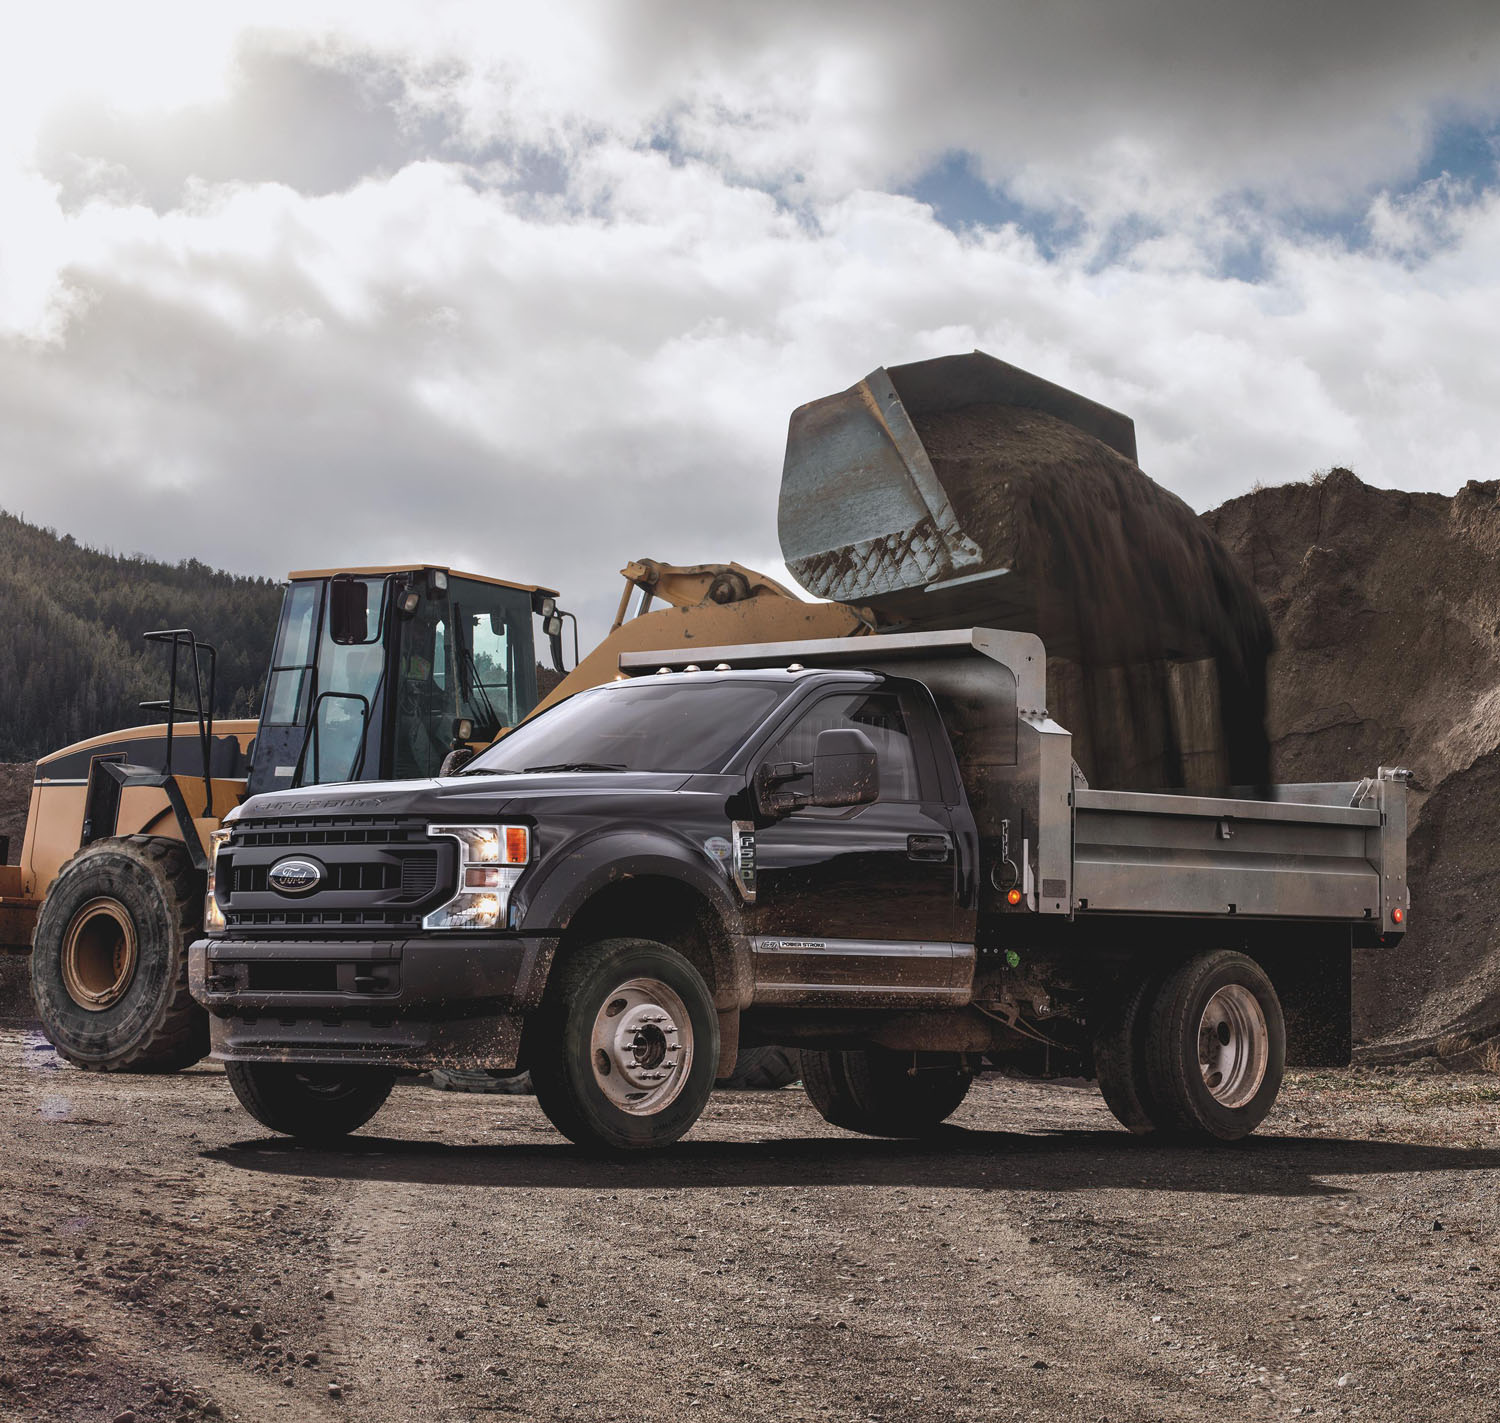 Ford Super Duty Chassis Cab Dominates With 12 750 Pound Payload